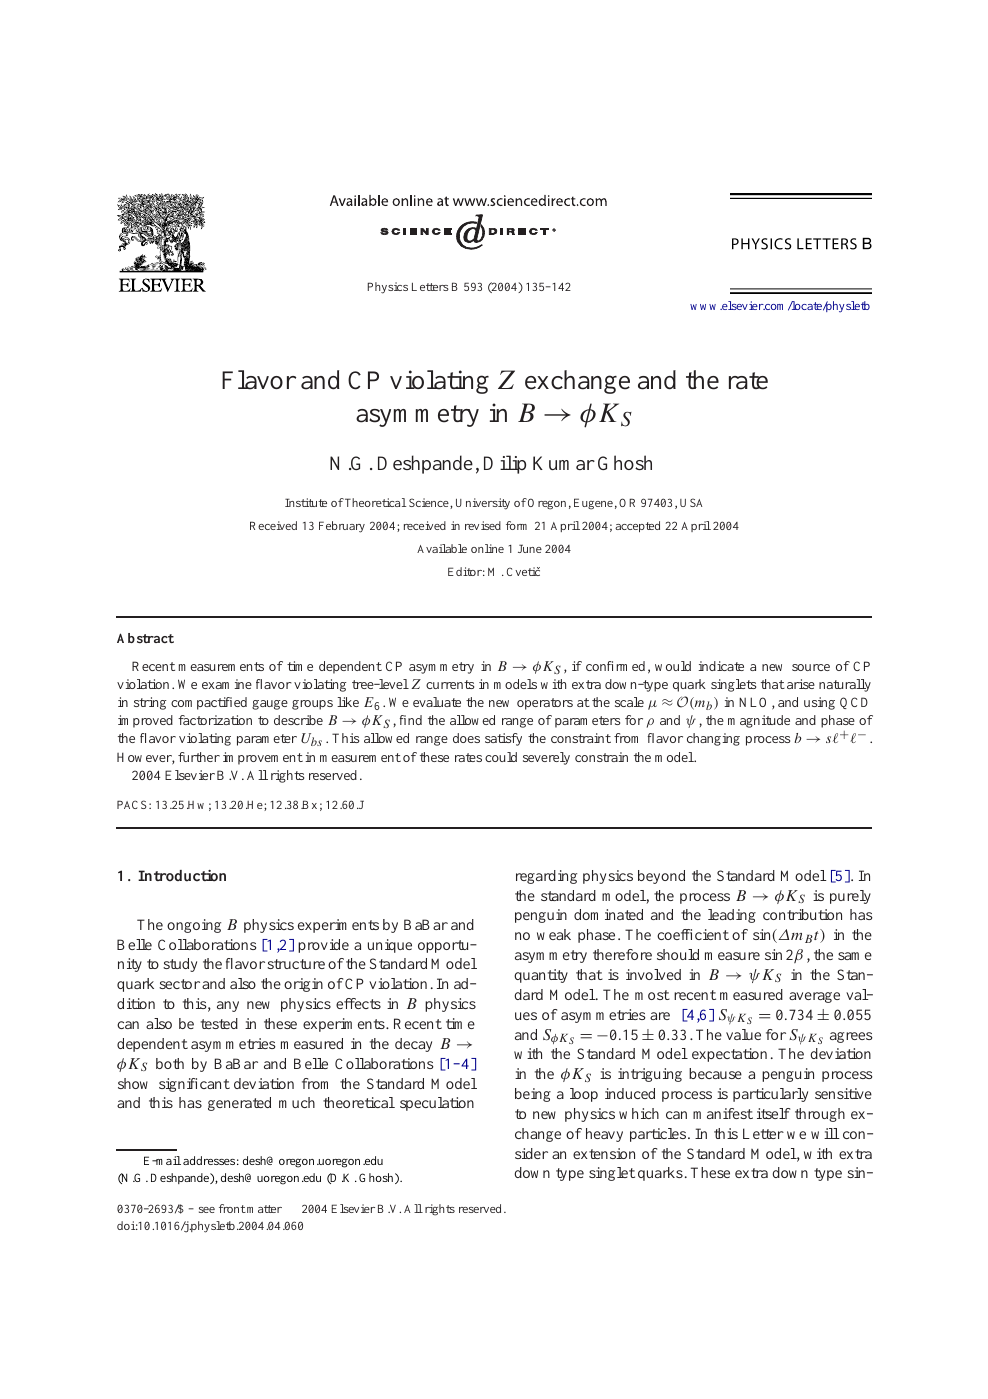 Flavor And Cp Violating Z Exchange And The Rate Asymmetry In B Fks Topic Of Research Paper In Physical Sciences Download Scholarly Article Pdf And Read For Free On Cyberleninka Open Science